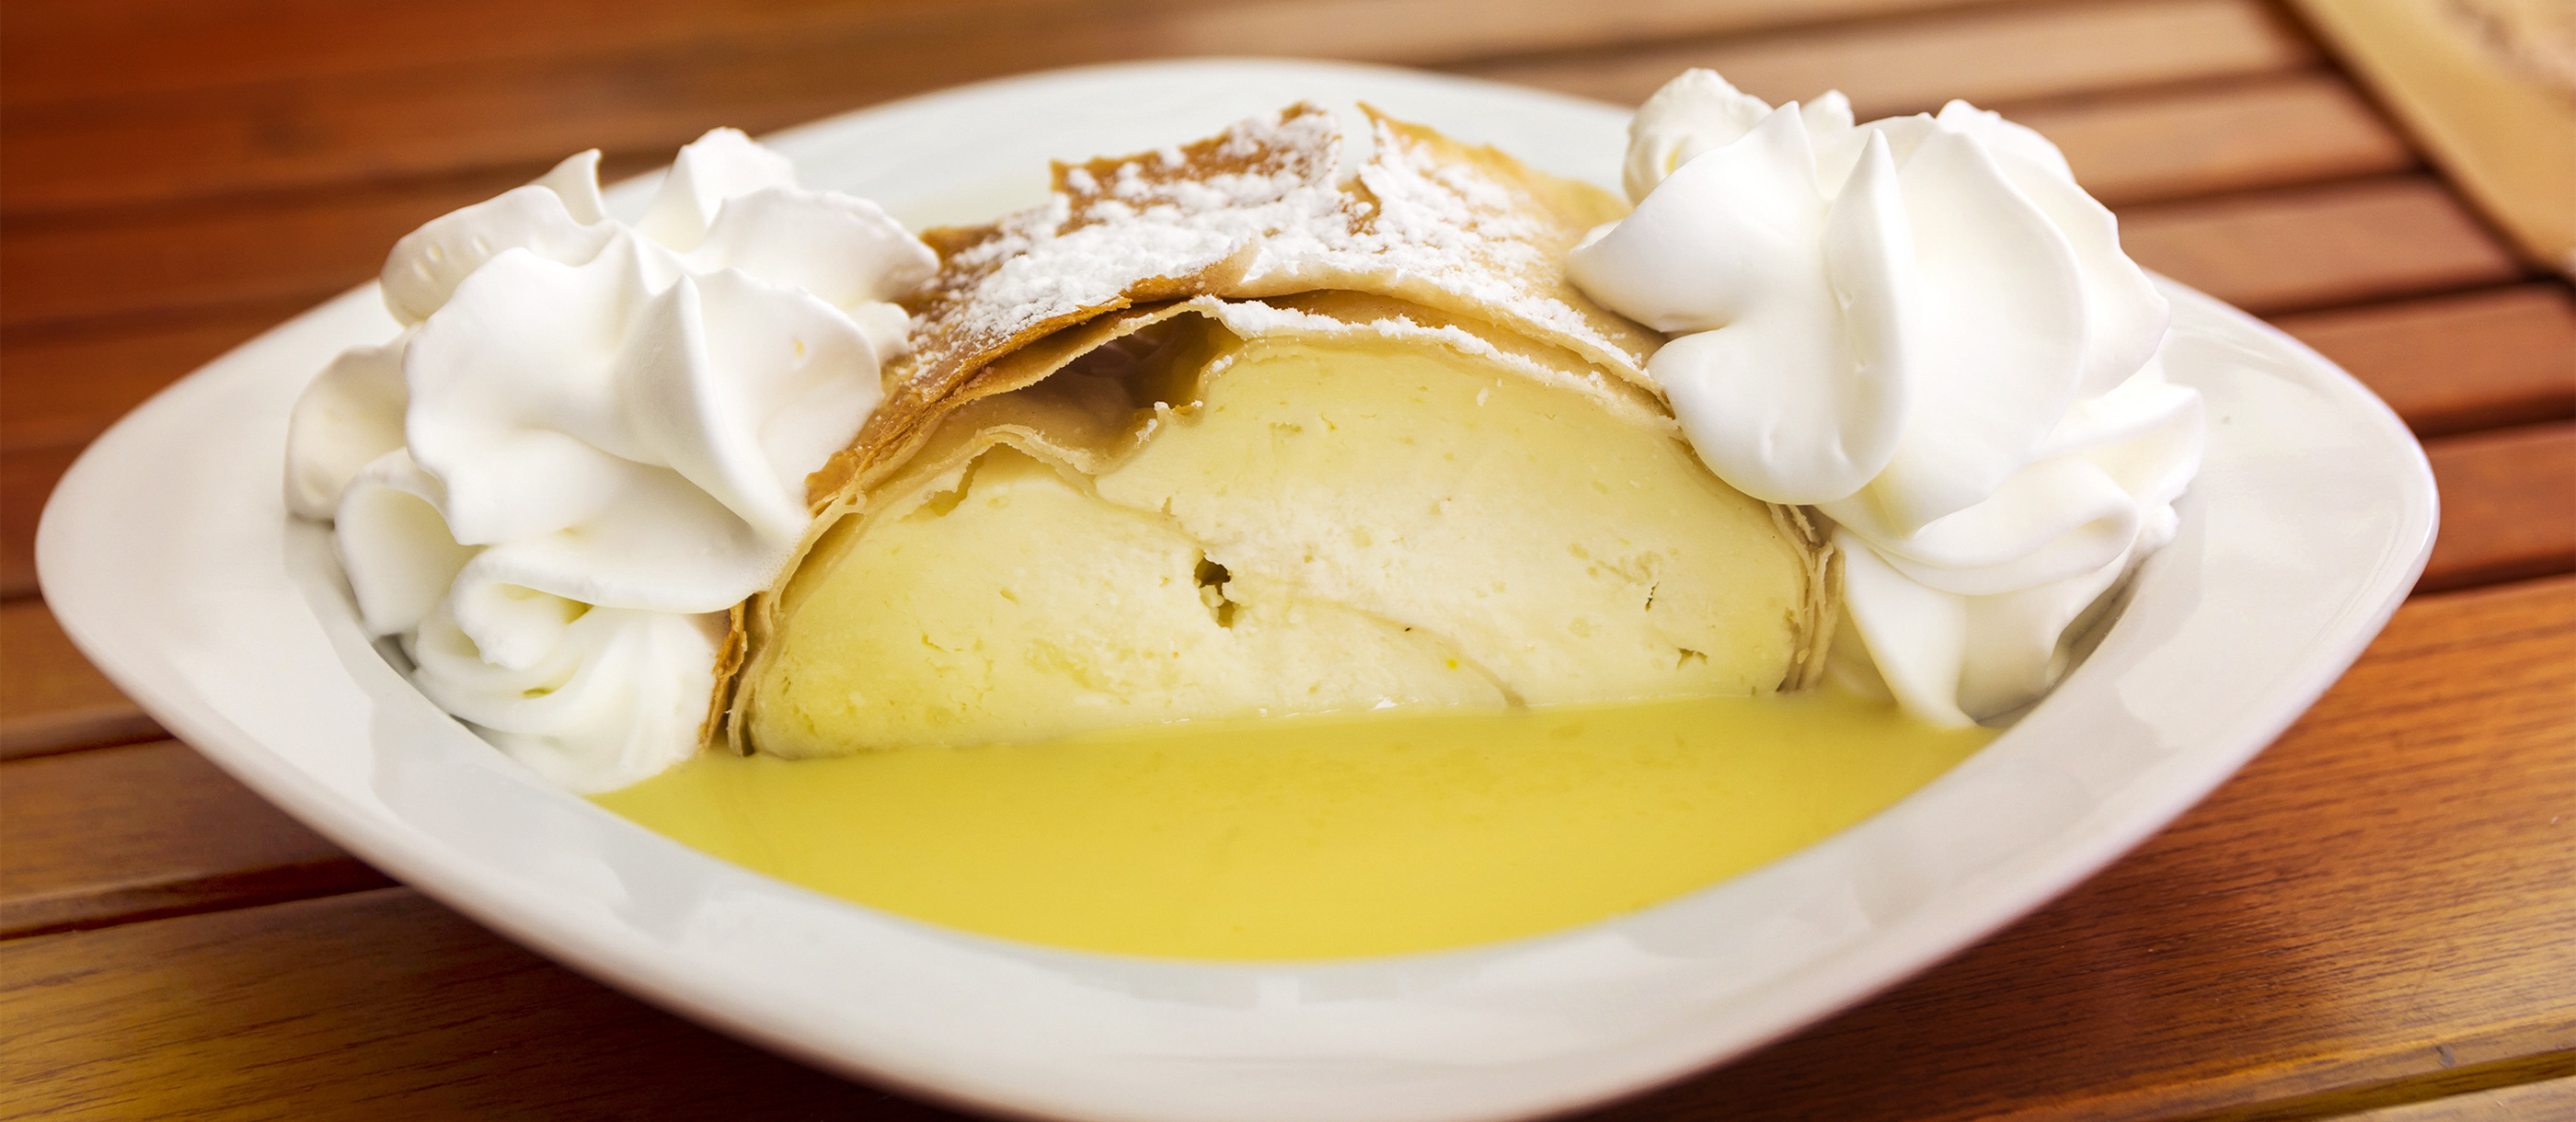 Millirahmstrudel | Traditional Sweet Pastry From Vienna, Austria